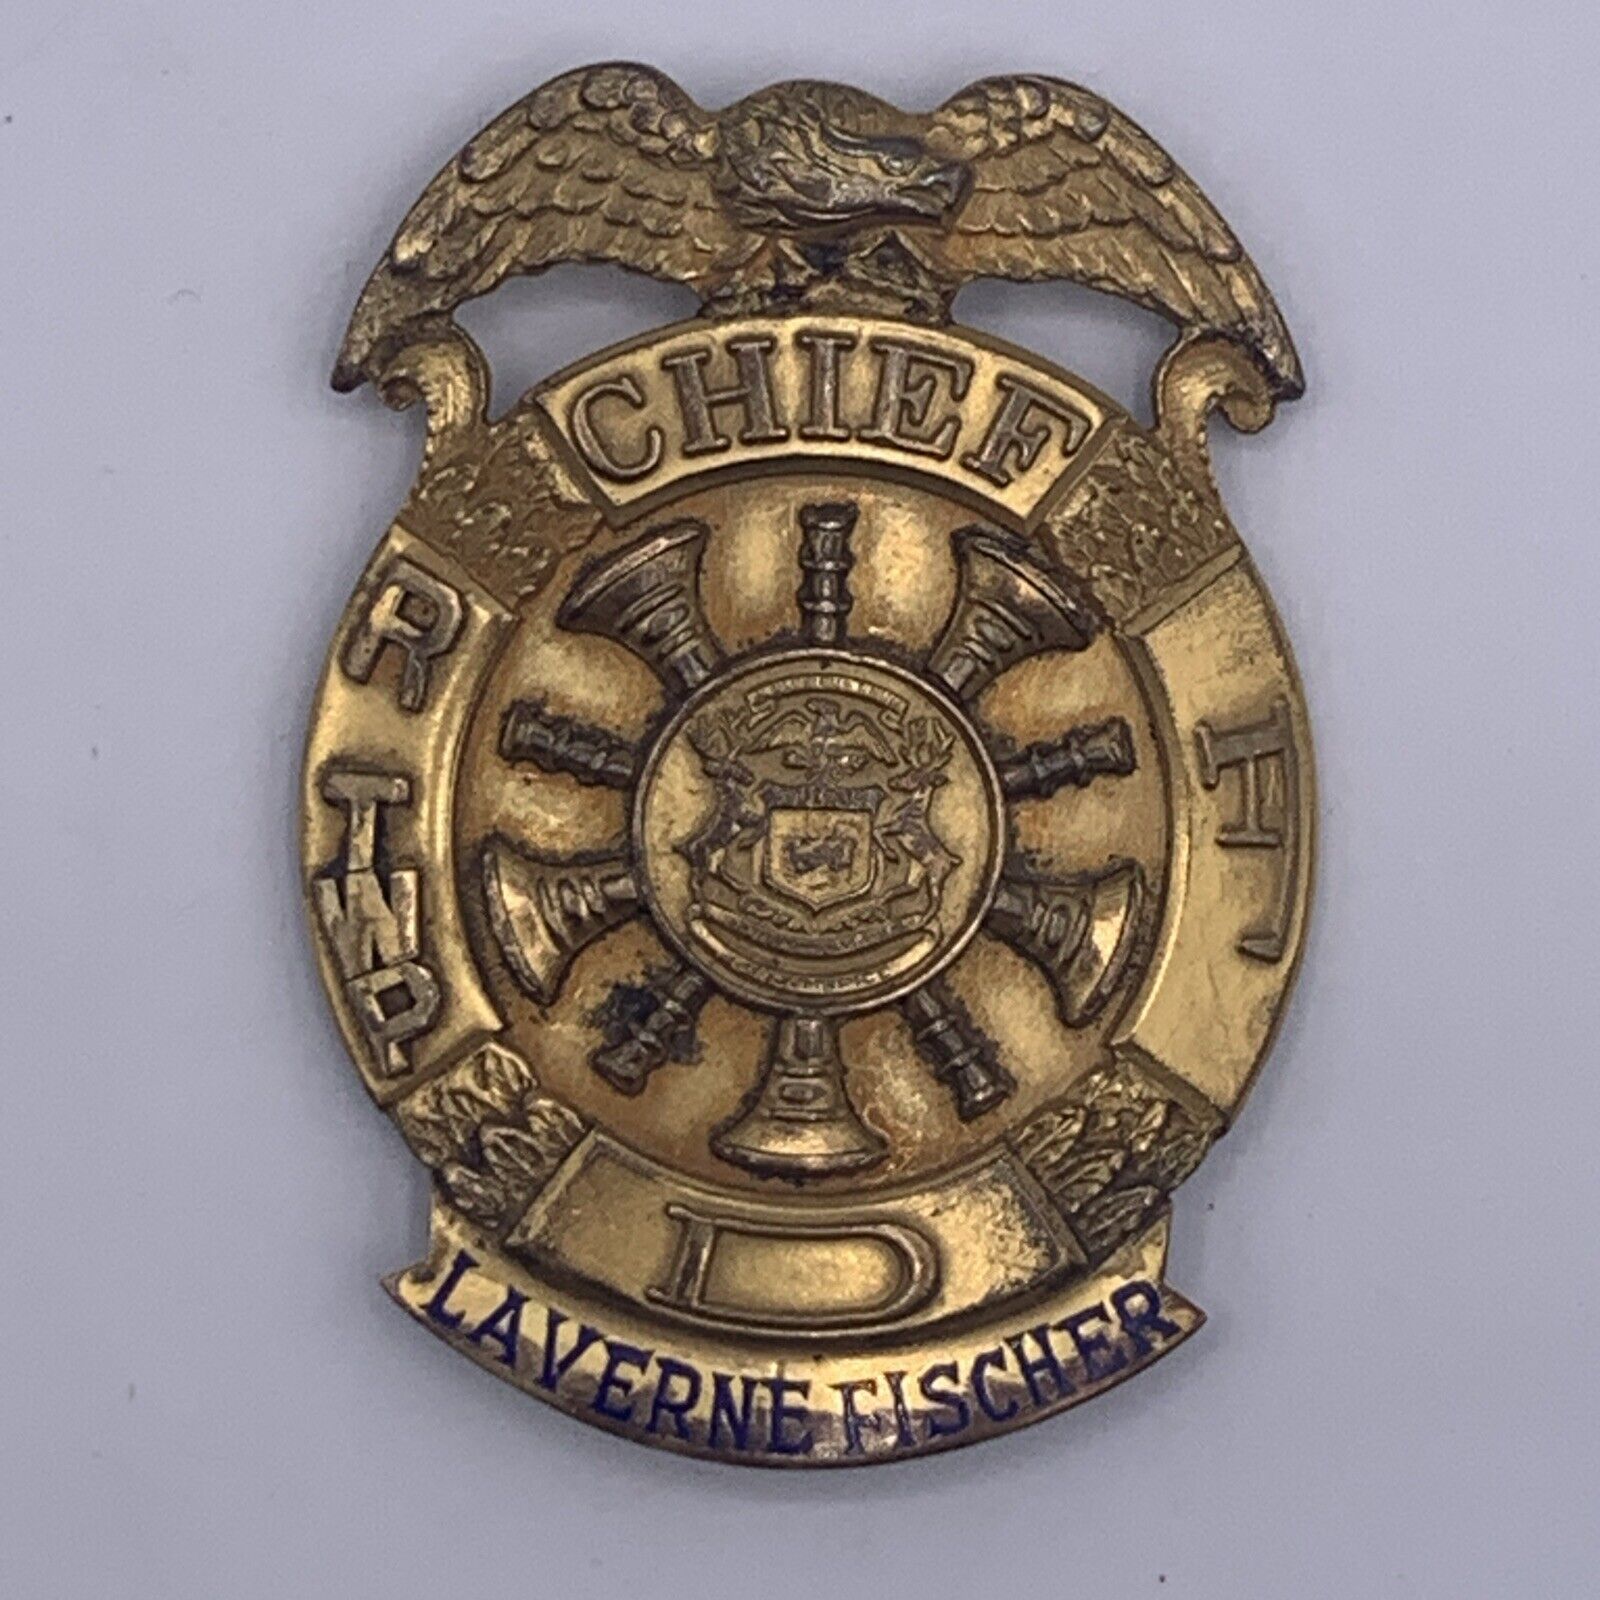 Vintage Detroit Redford Township Fire Chief Badge Weyhing Cast Brass